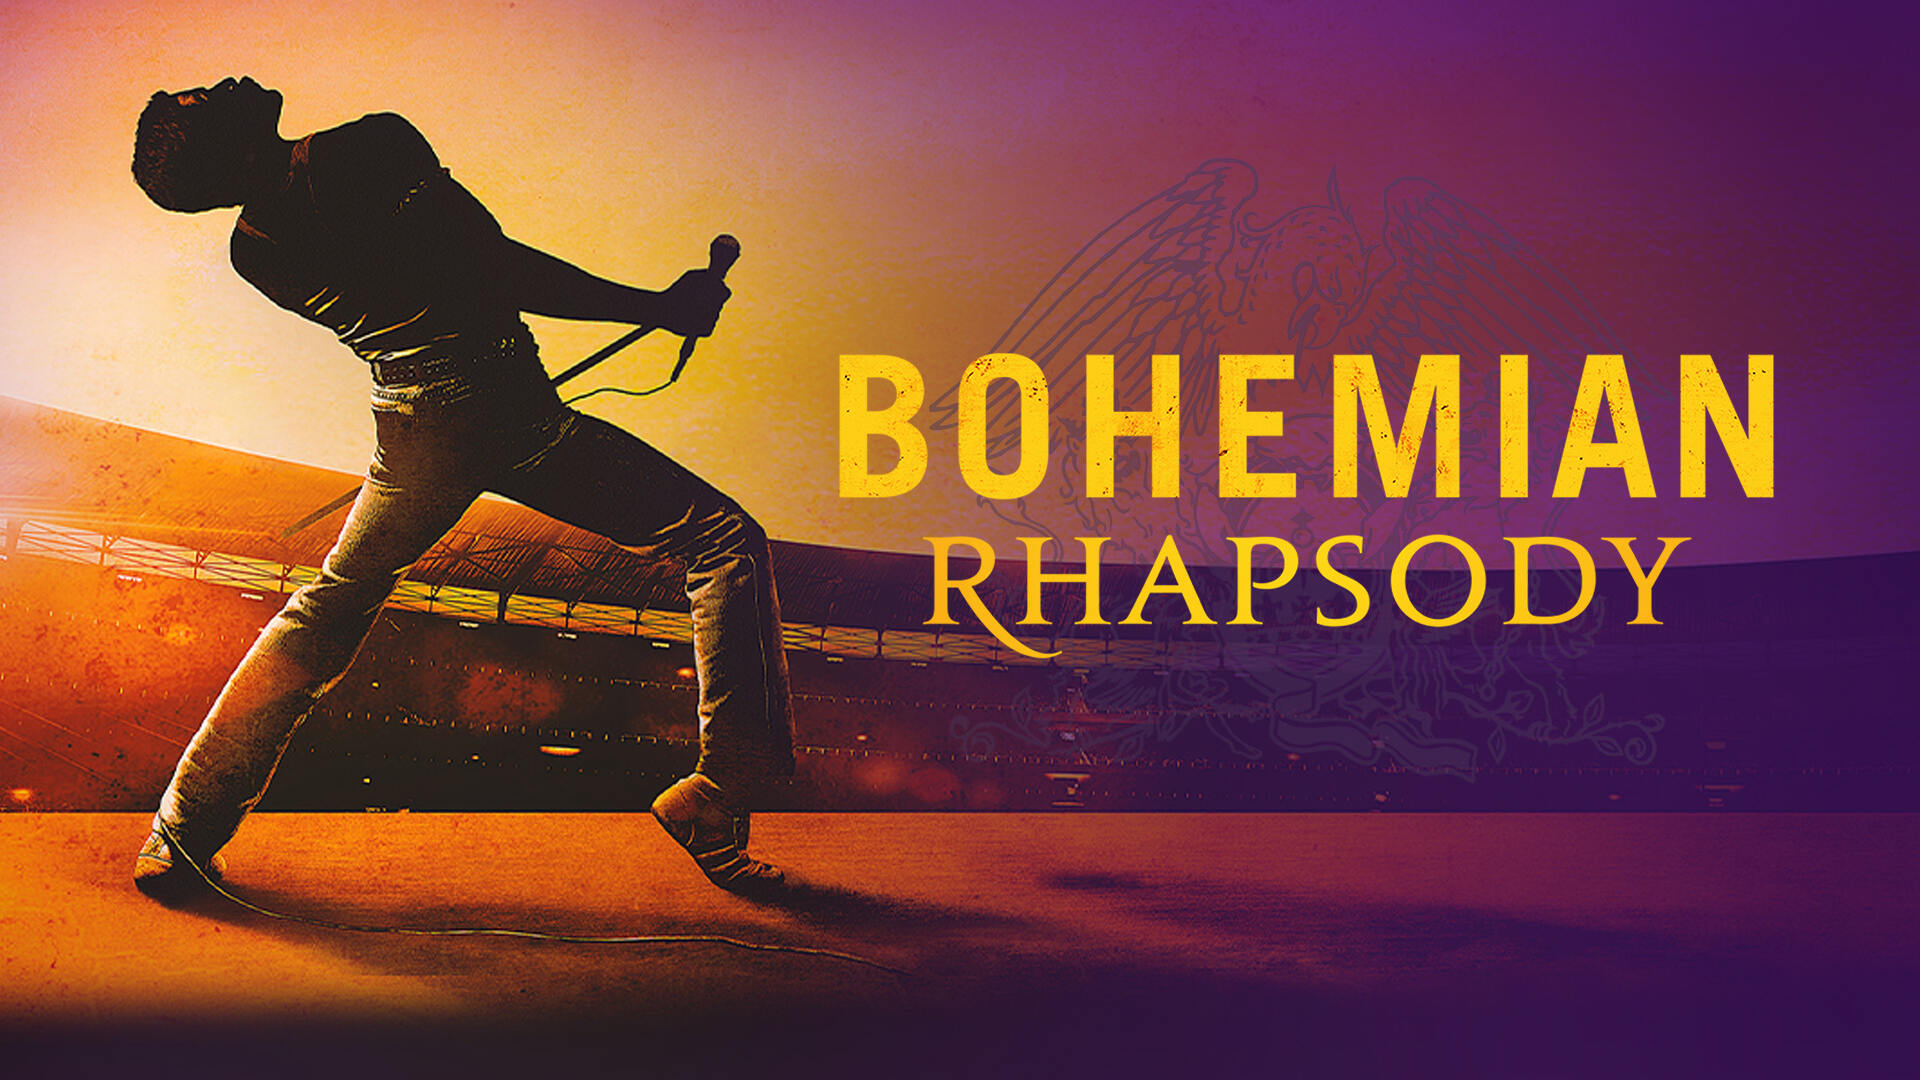 38-facts-about-the-movie-bohemian-rhapsody